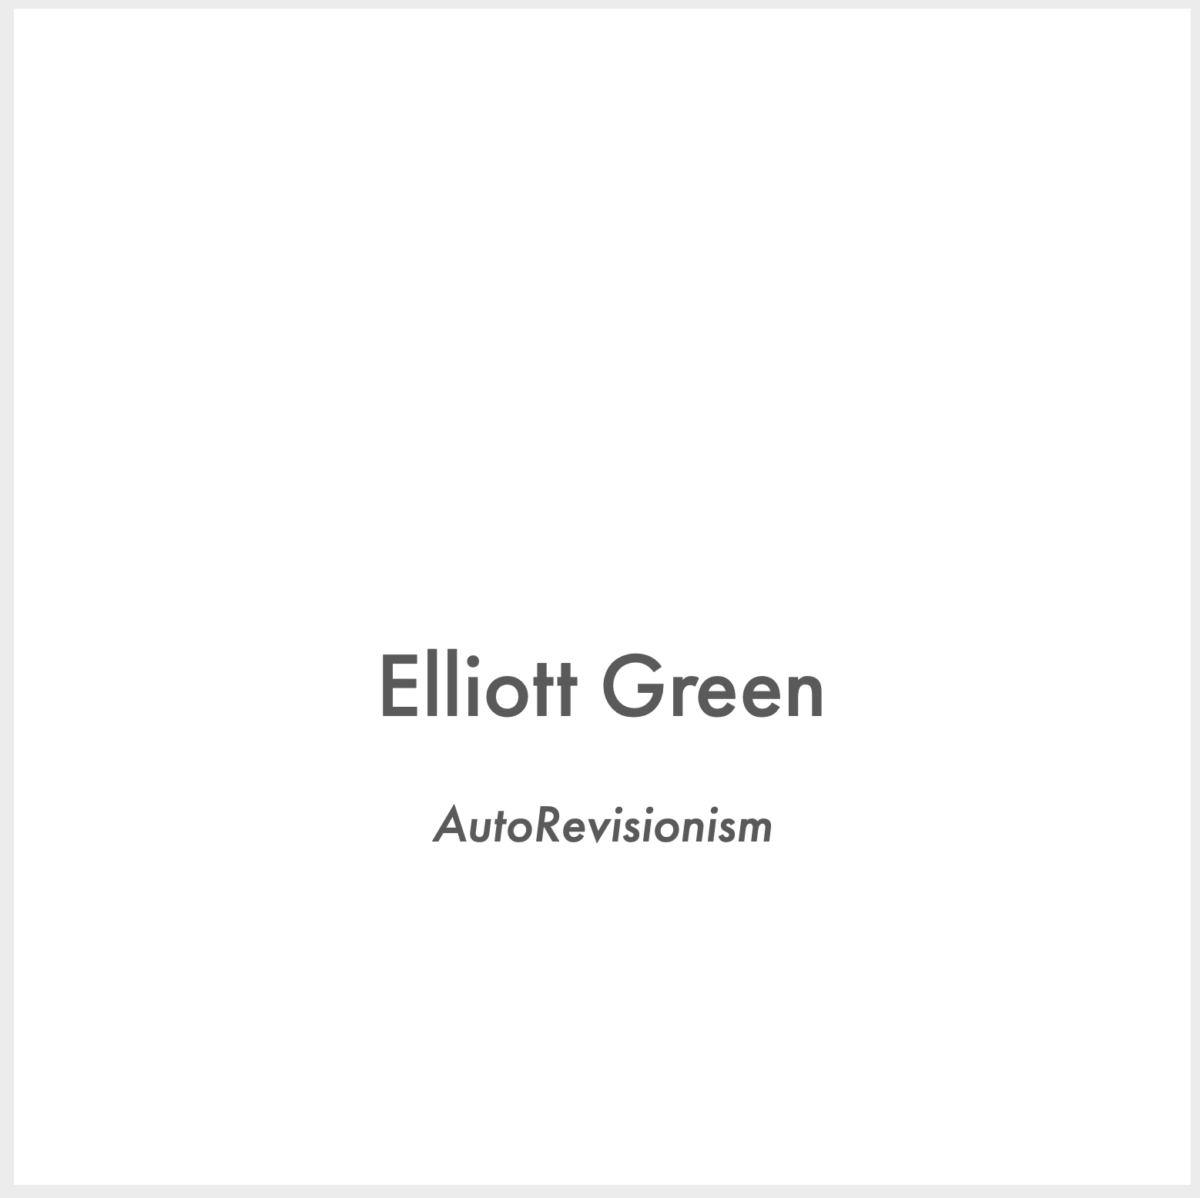 This is the cover of the Elliott Green catalog for AutoRevisionism and exhibition at Pamela Salisbury Gallery